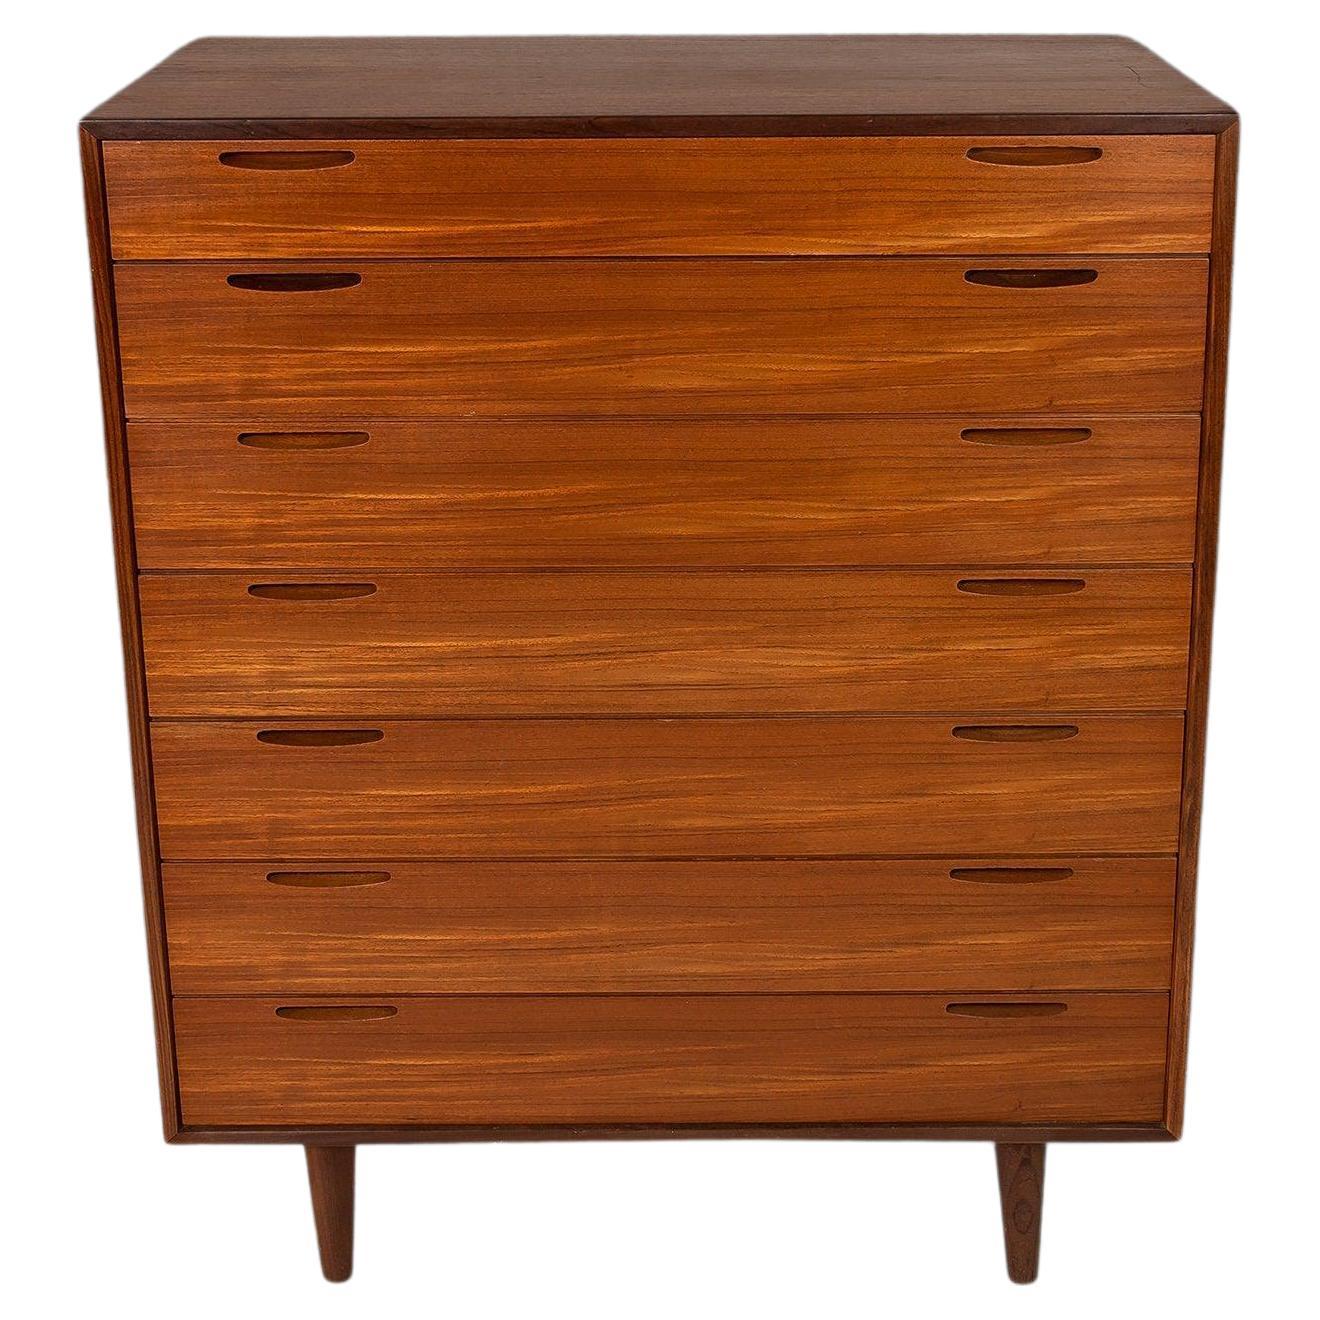 As rare as it is aesthetically pleasing this dresser by J. Clausen & Son Brande Mobelfabrik is the epitome of functional art. The details on this piece are exceptional with inset pulls, precise dovetail joints and matchbook teak veneer that are